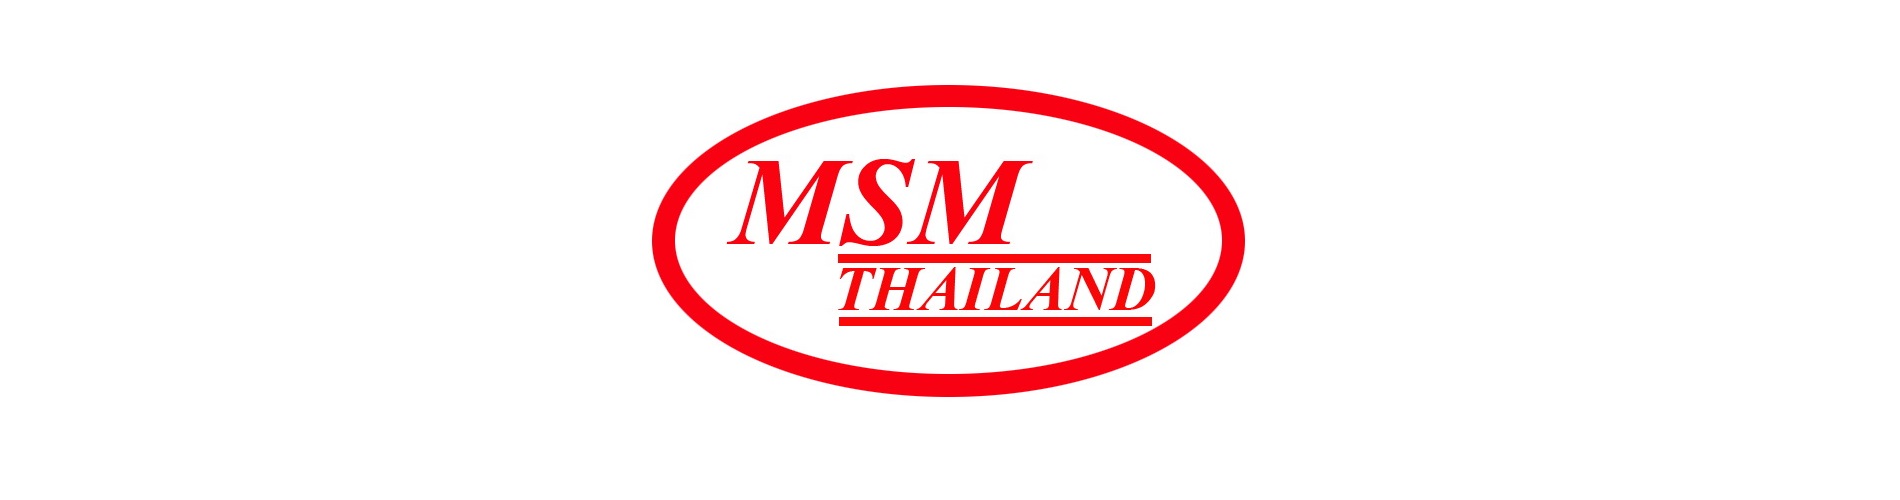 MSM Thailand. Formed and Fabricated